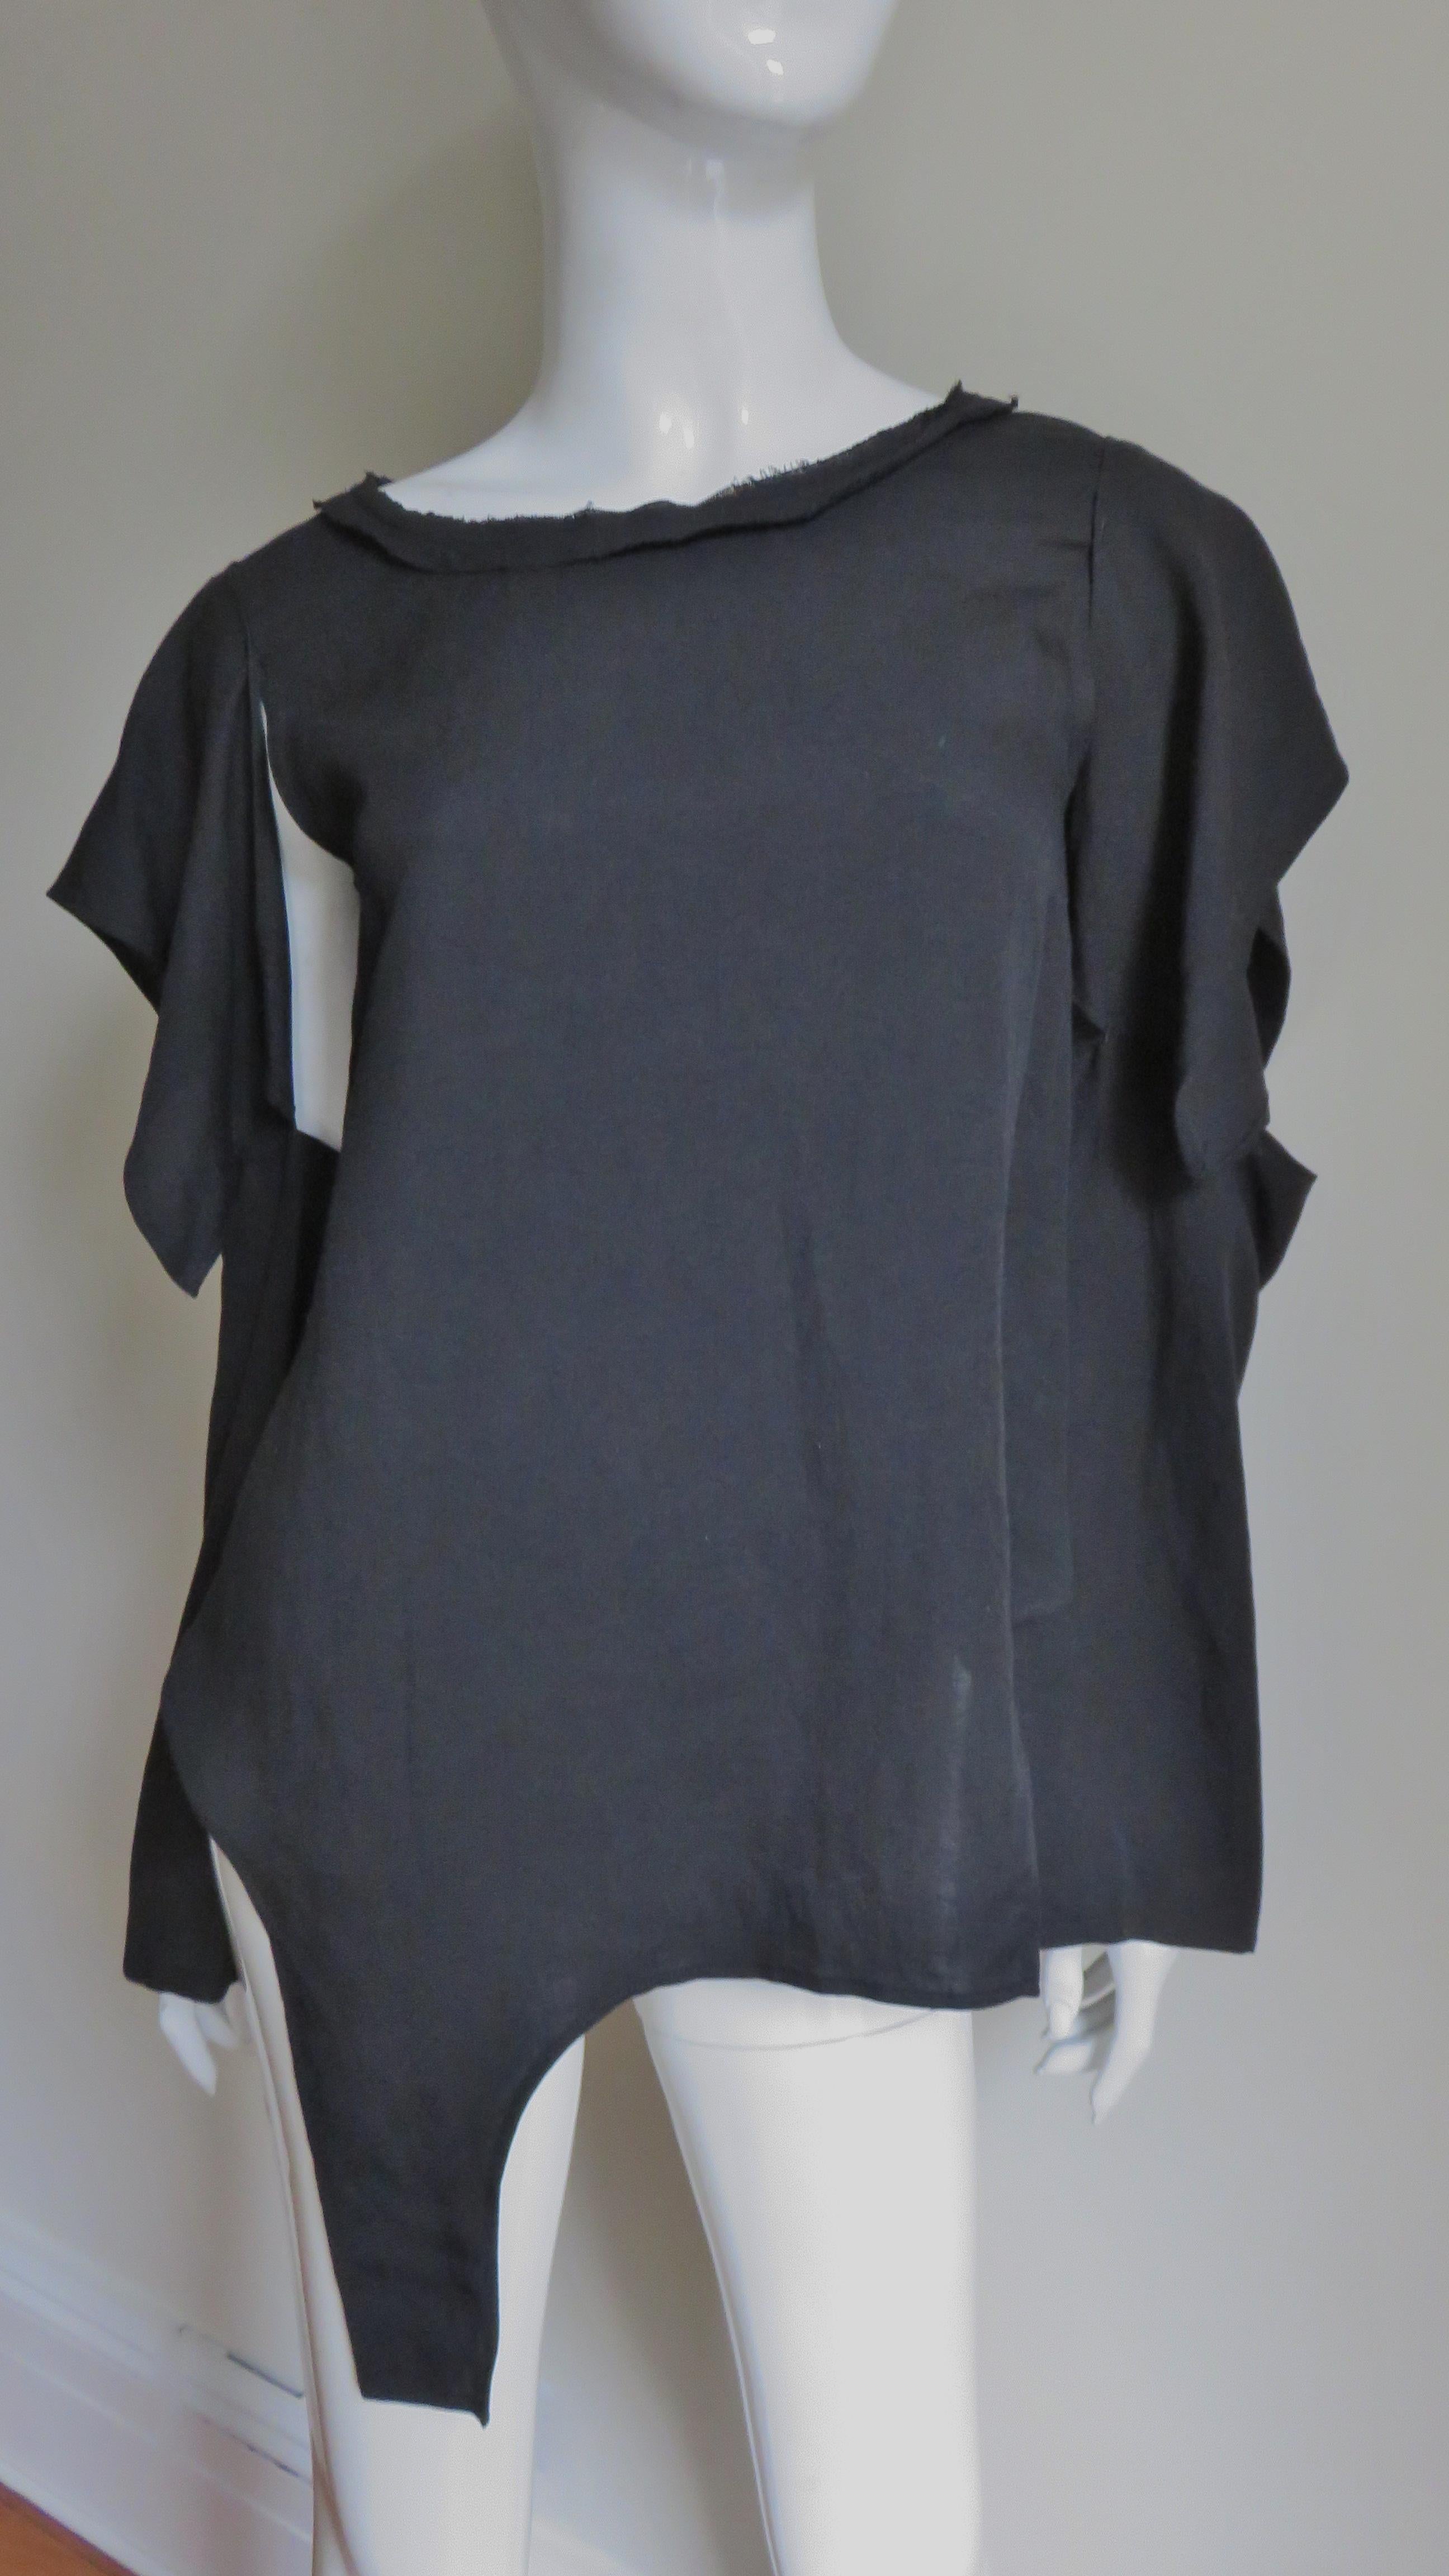 A fabulous black linen blend top, shirt from Yohji Yamamoto.  It has a crew neckline, long sleeves with cut outs and slits and an asymmetric hemline and a side zipper.
Fits sizes Small, Medium.  Marked Japanese size 1.

Bust  36